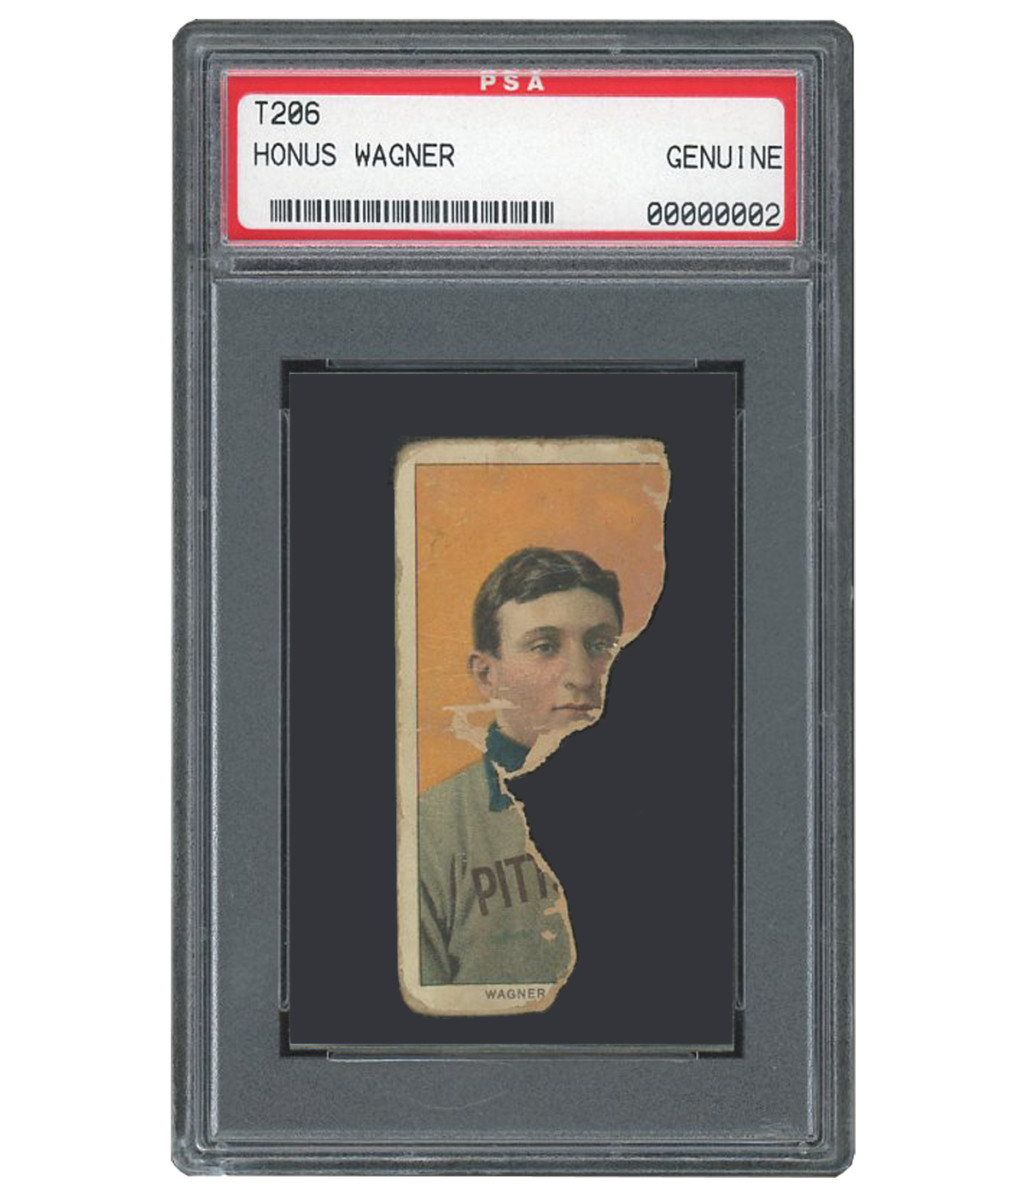 A T206 Honus Wagner card that is torn almost in half is up for auction at SCP Auctions.